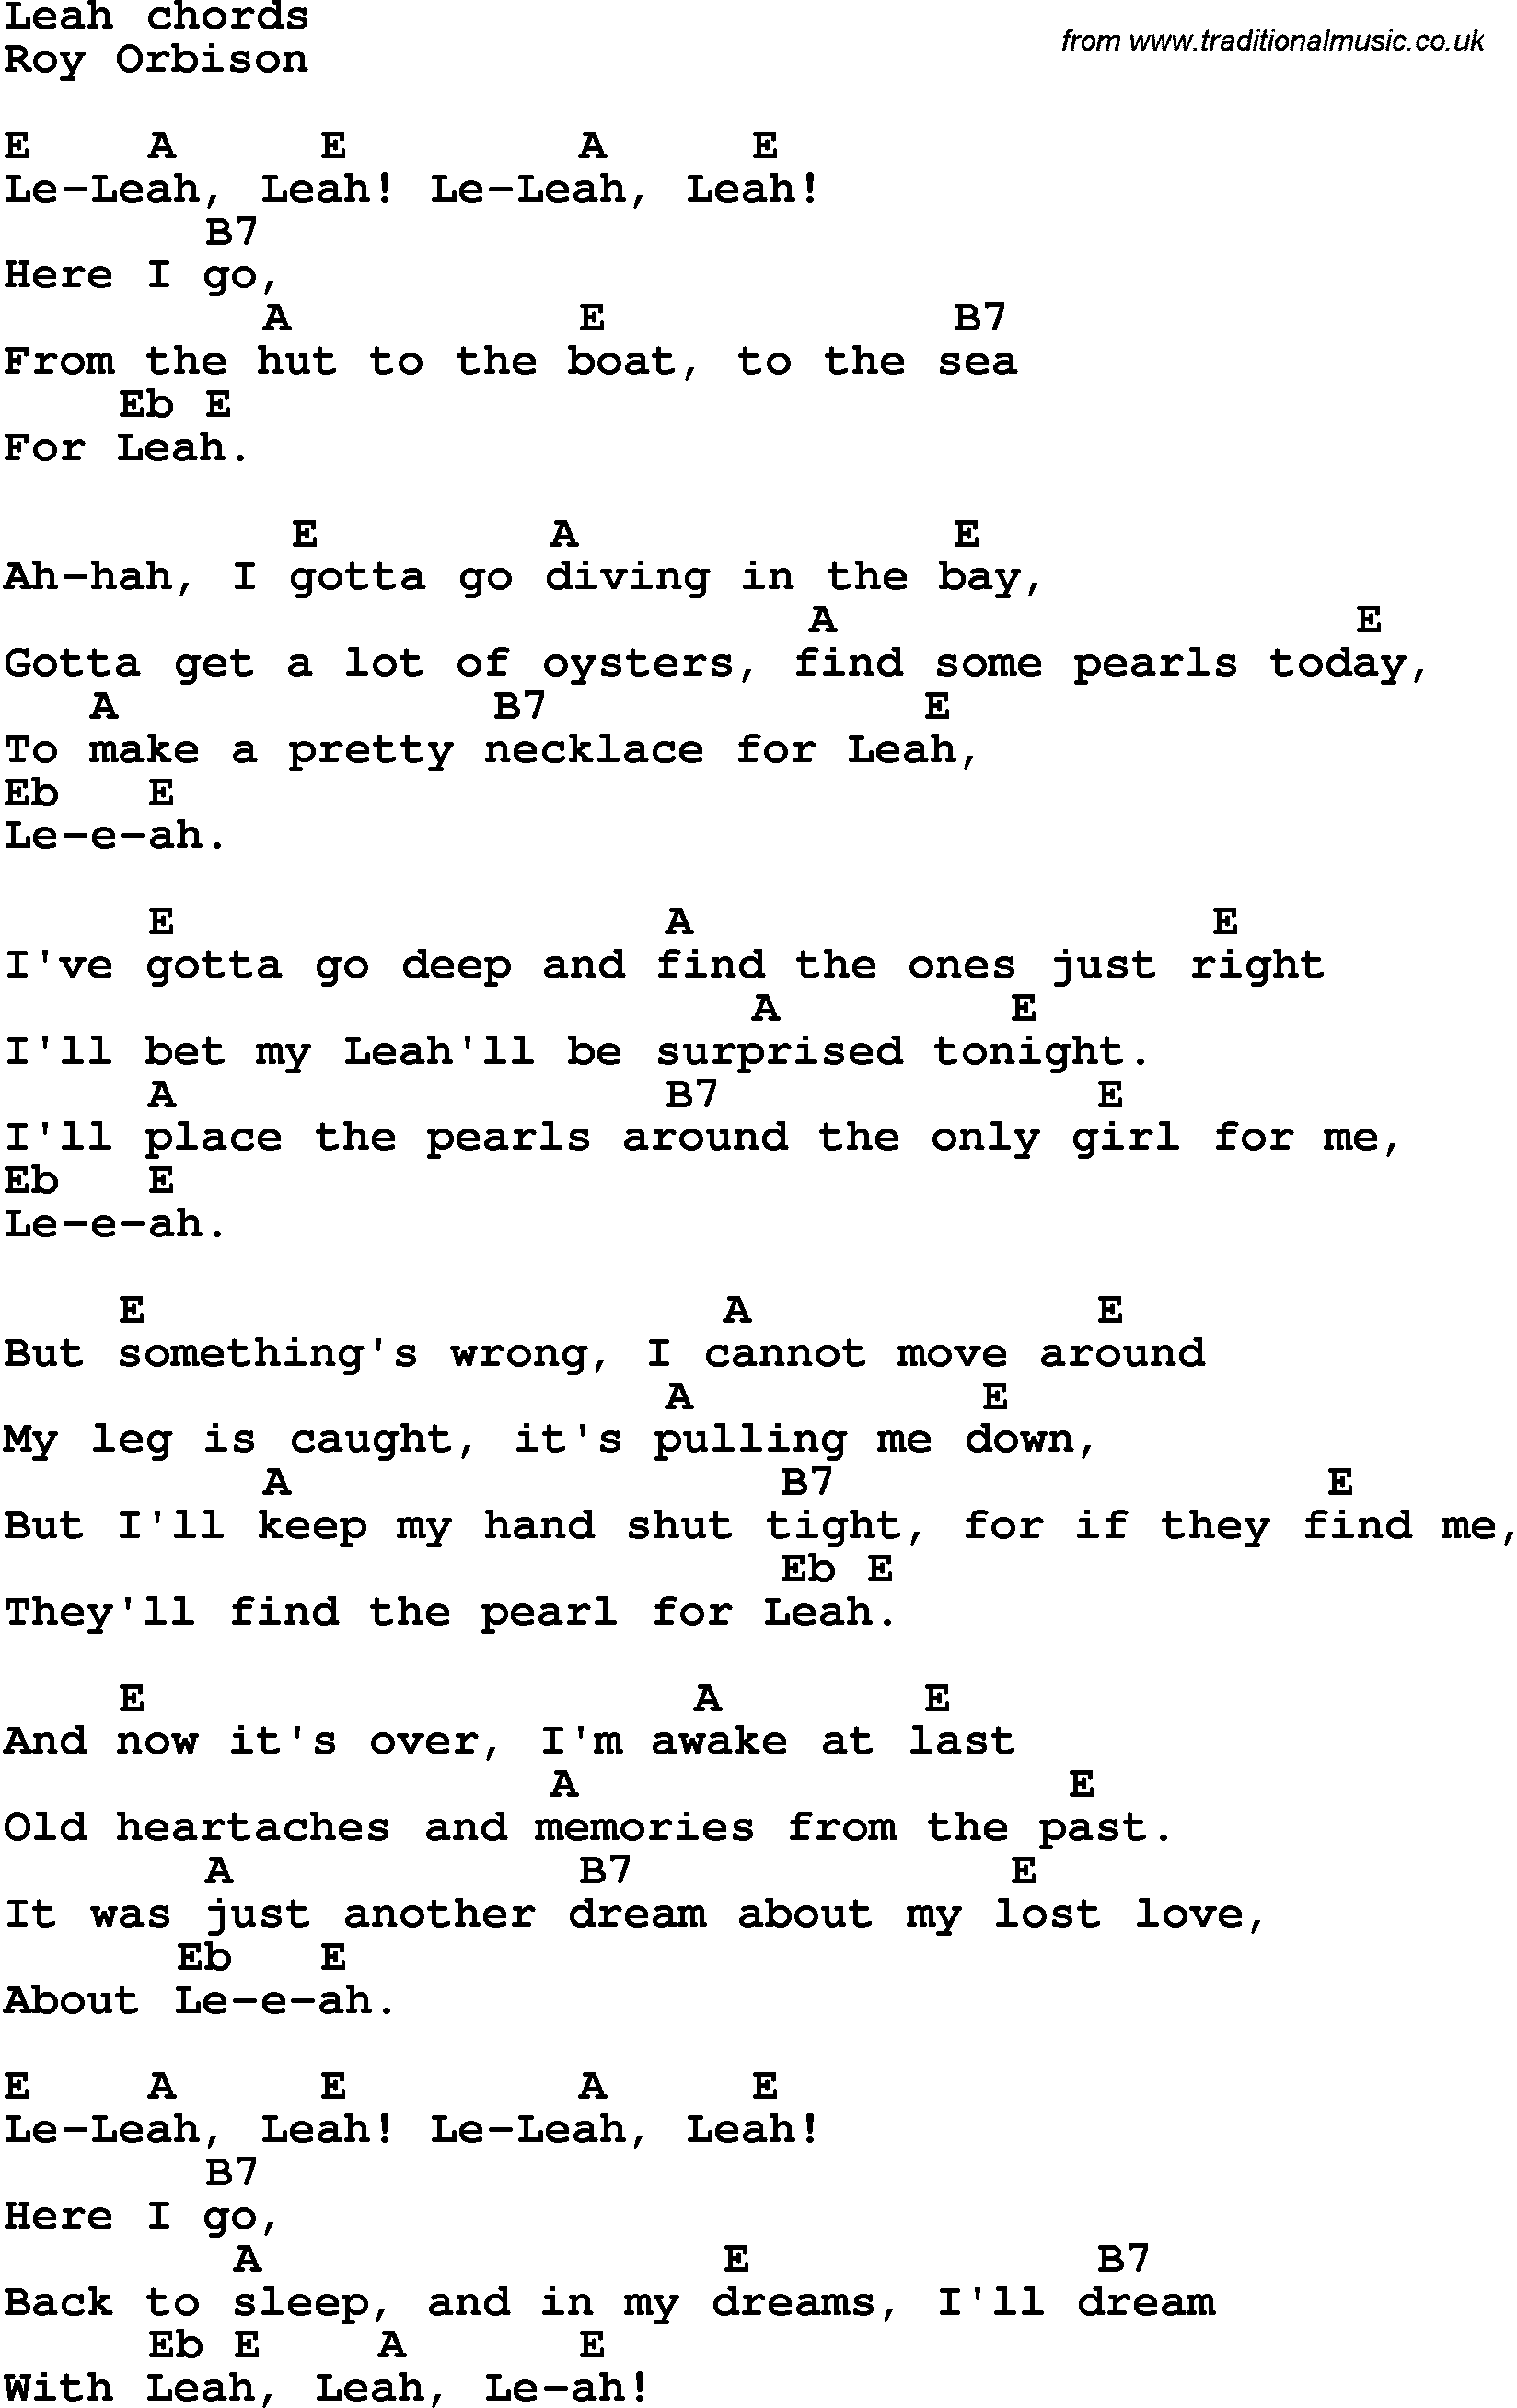 Song Lyrics with guitar chords for Leah